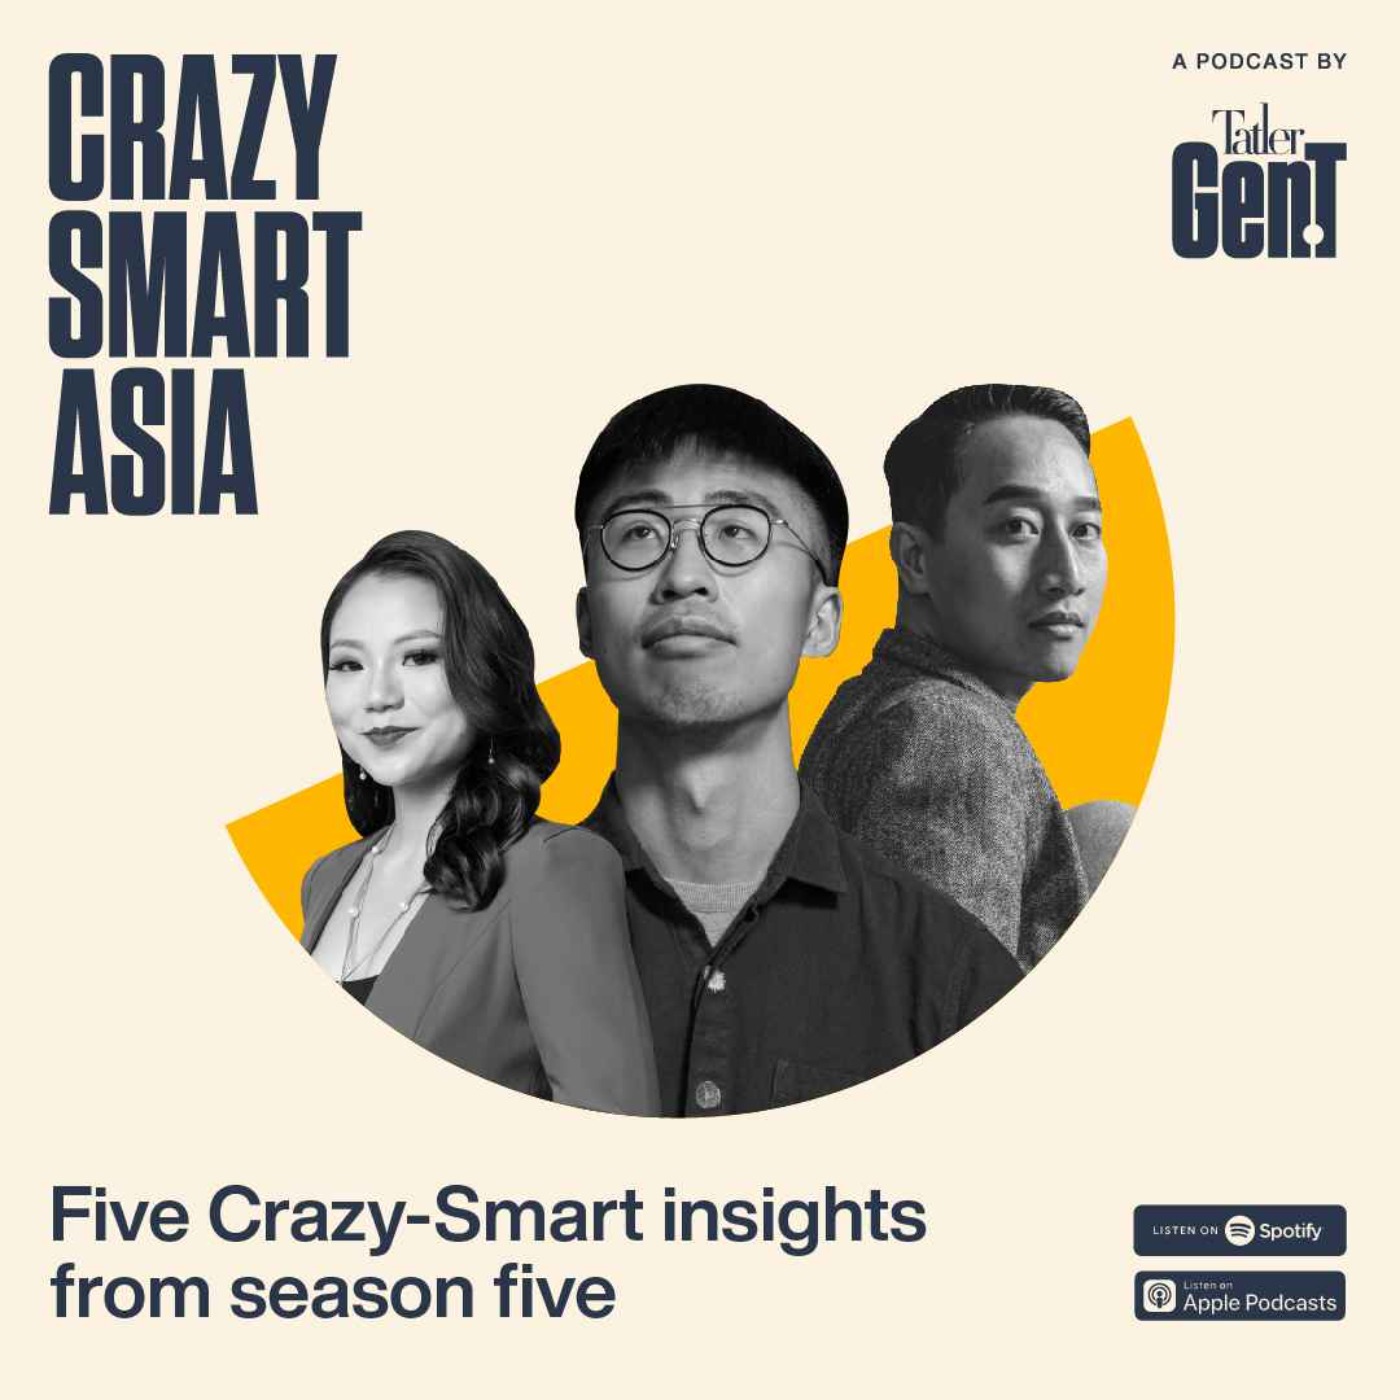 Five crazy-smart insights from season five